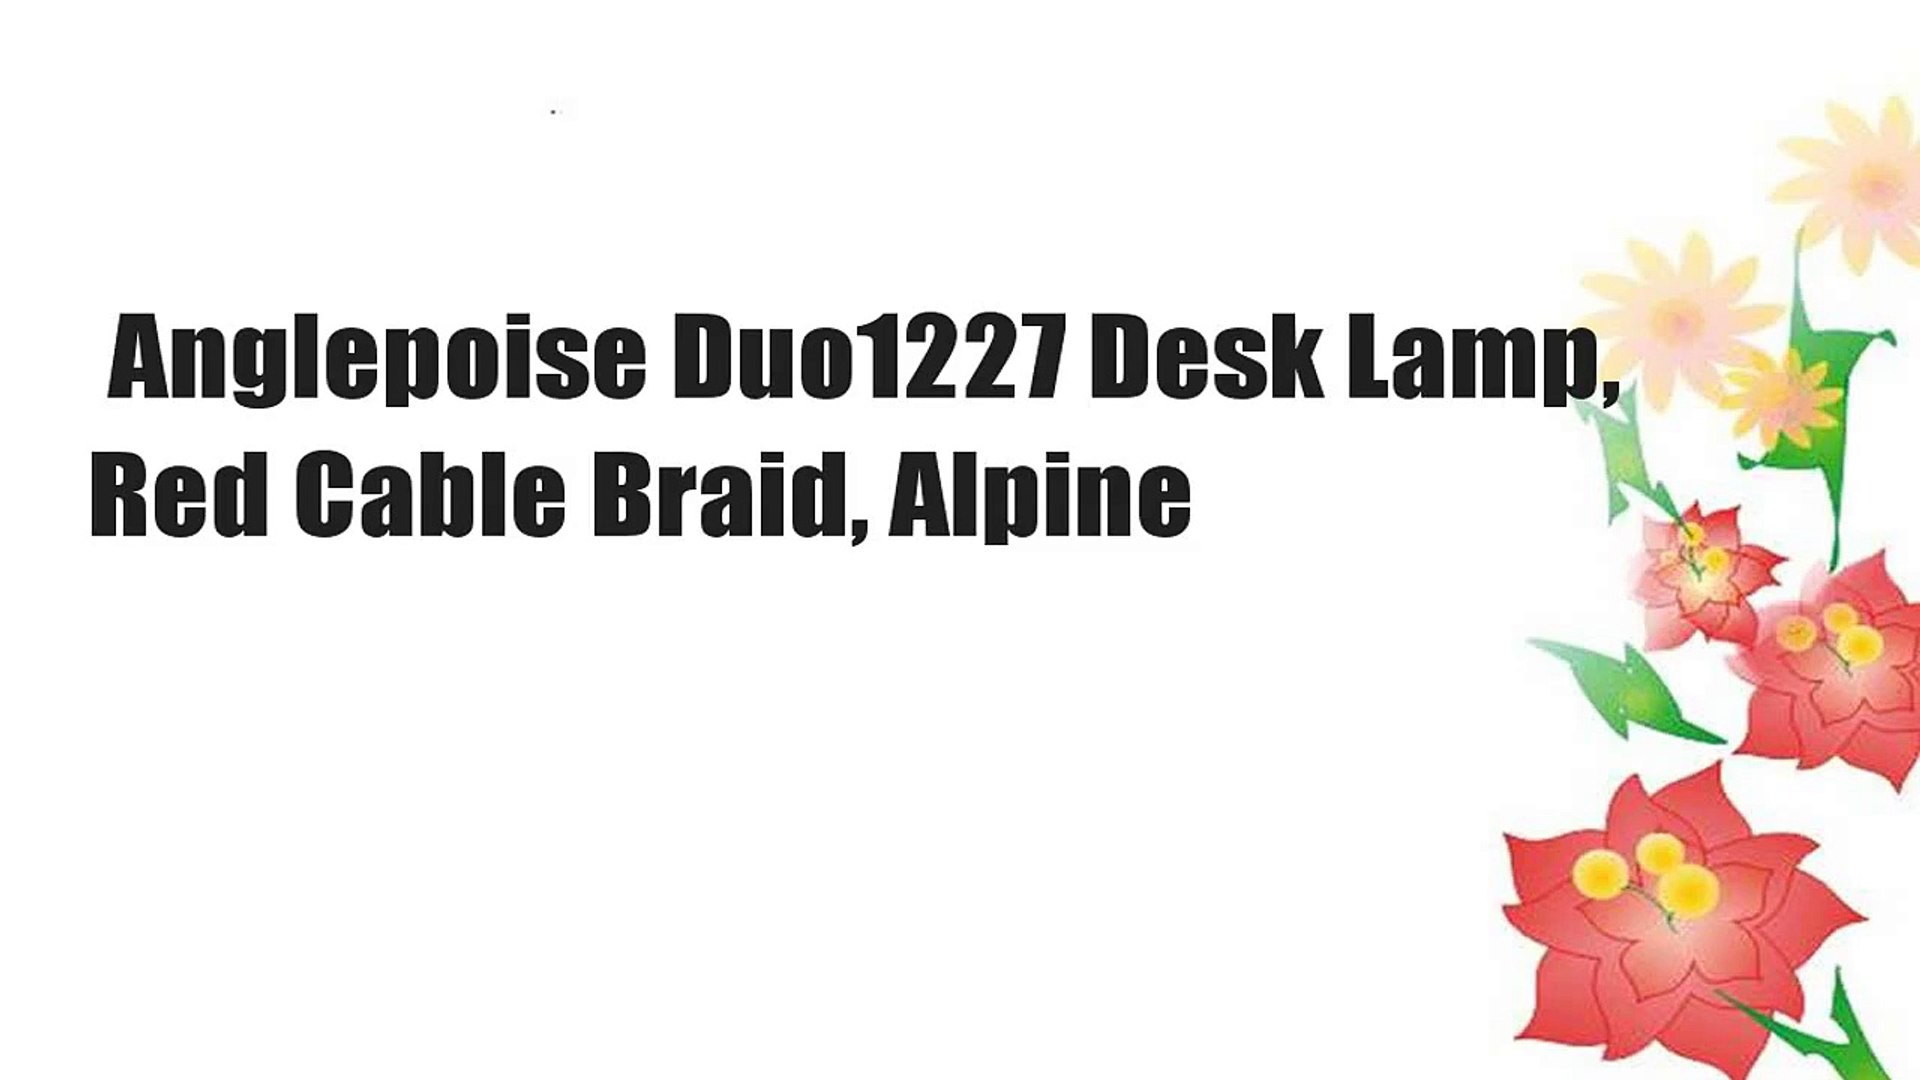 Anglepoise Duo1227 Desk Lamp Red Cable Braid Alpine Video